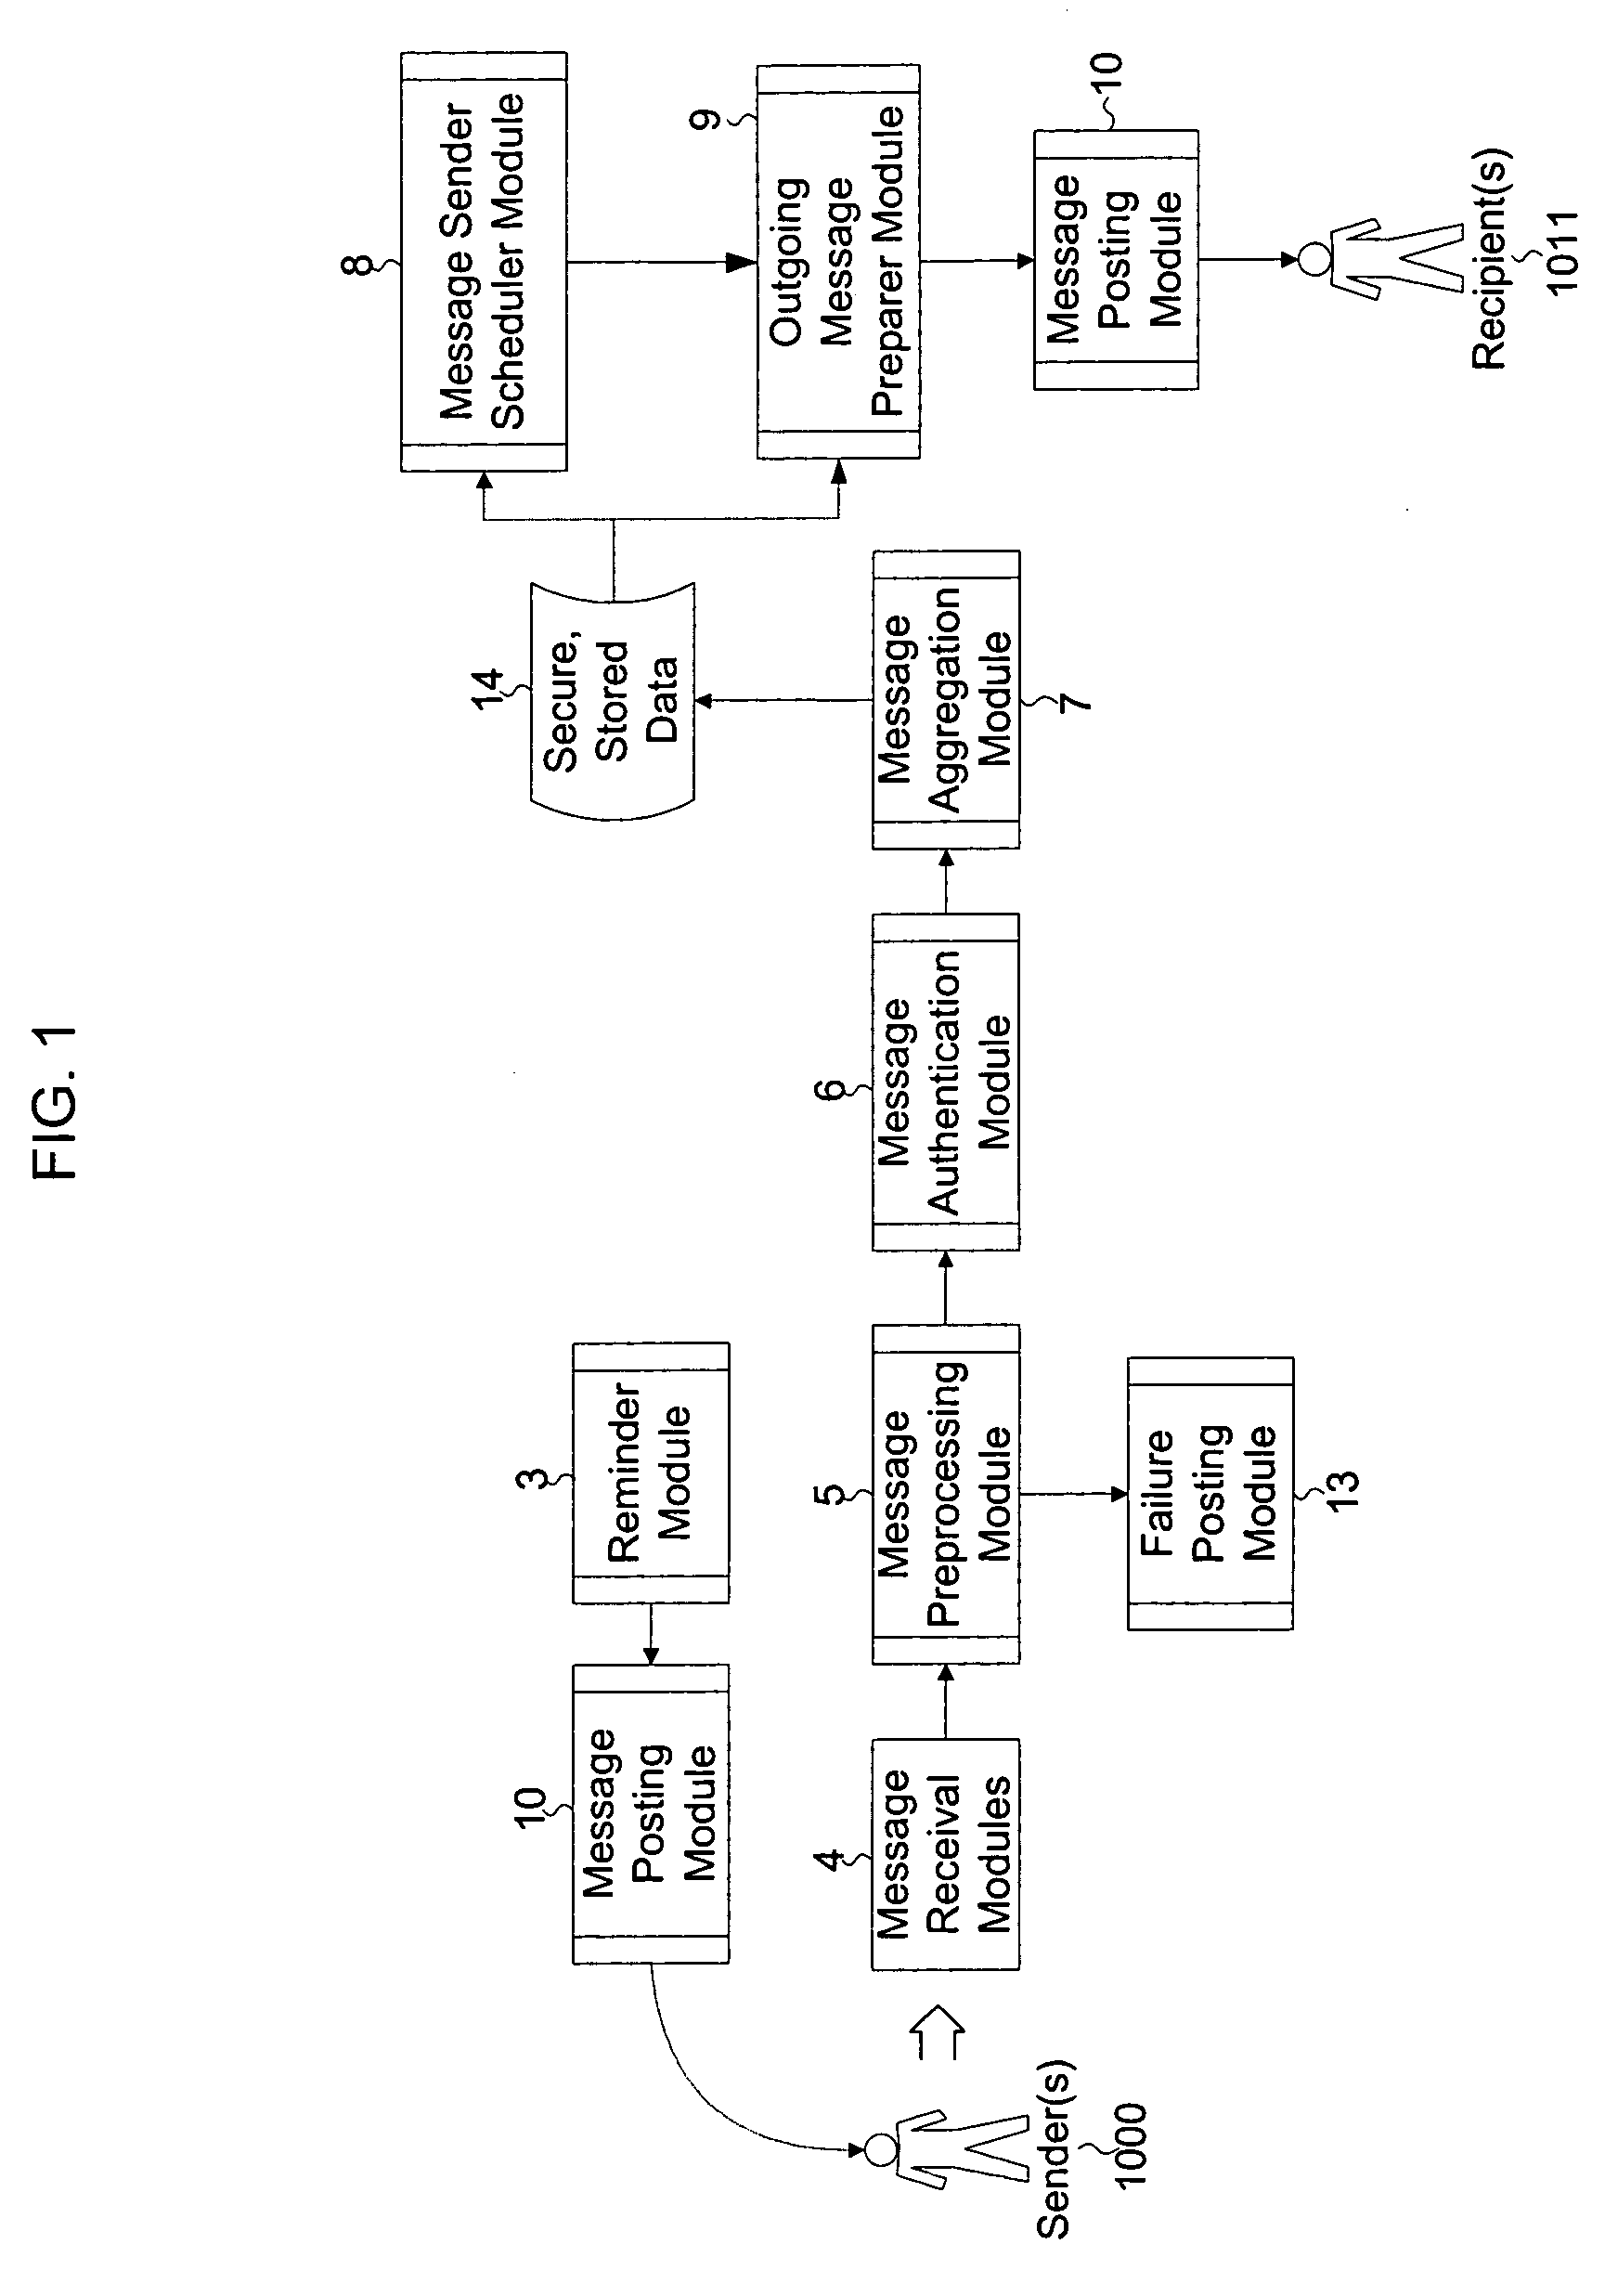 Method and system for communication from anonymous sender(s) to known recipient(s) for feedback applications